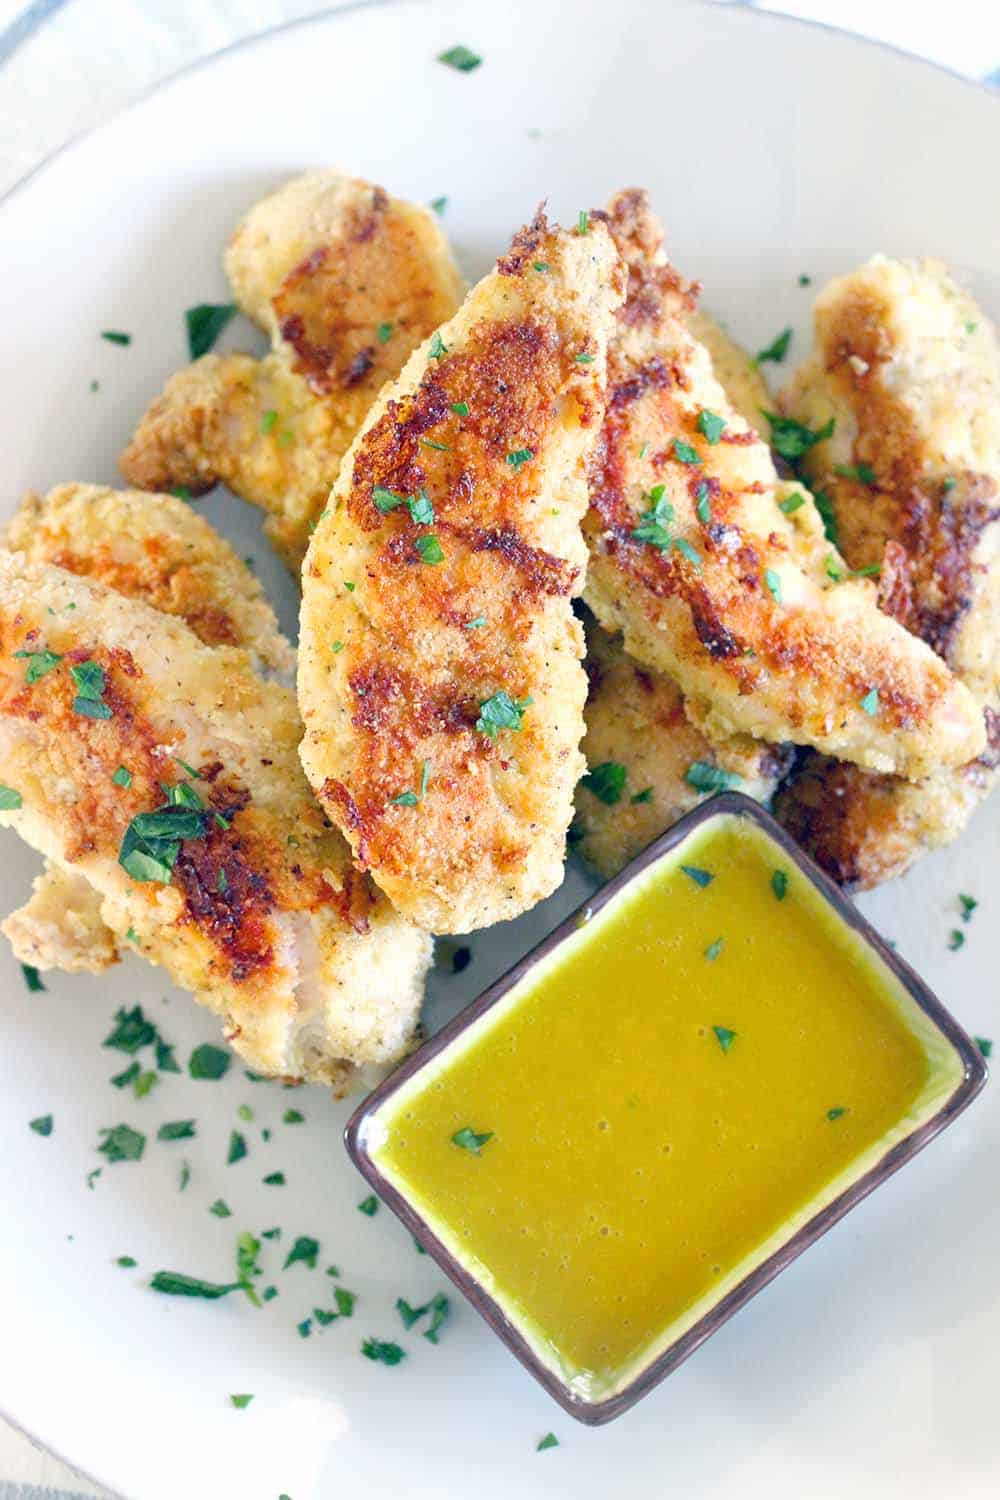 These Paleo Oven-Fried Chicken Tenders are grain-free and gluten-free, easy to make, and kid-friendly with a simple honey mustard dipping sauce. Perfect for game day or a casual weeknight dinner!